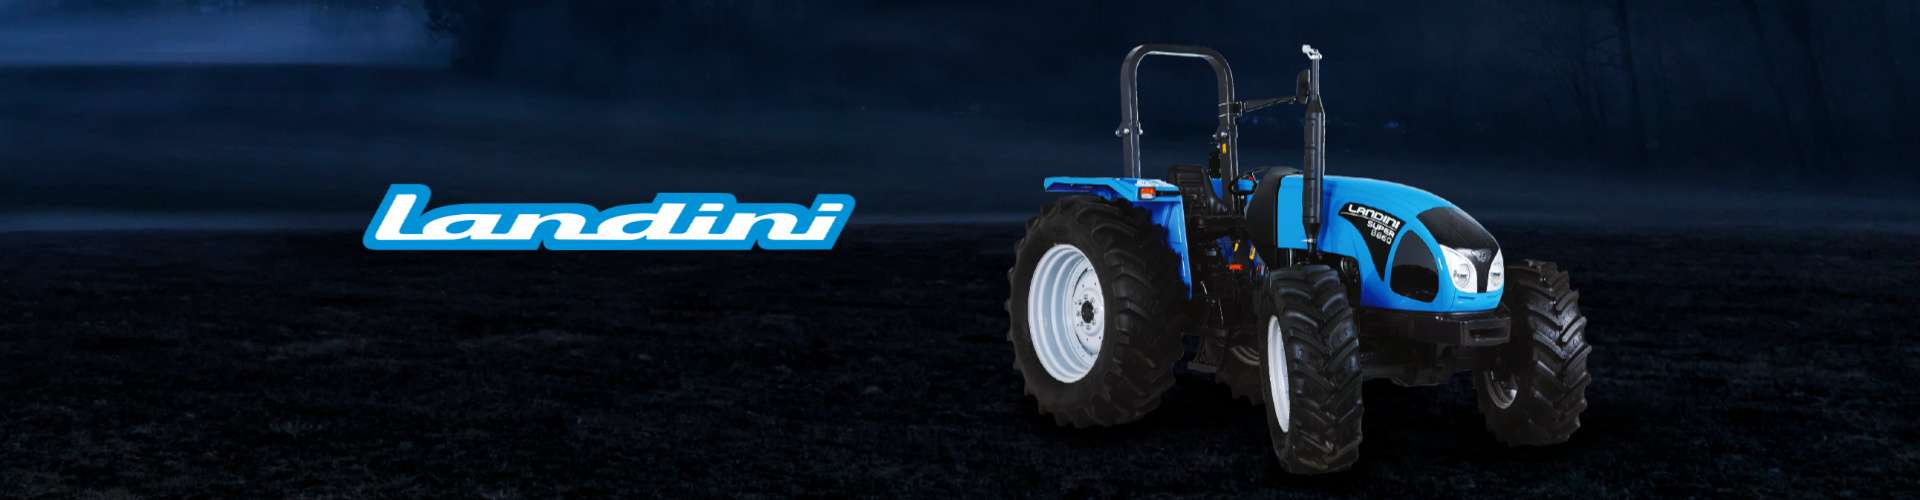 High-Performance Landini Tractor For Sale | Diesel-Tech Machinery Banner